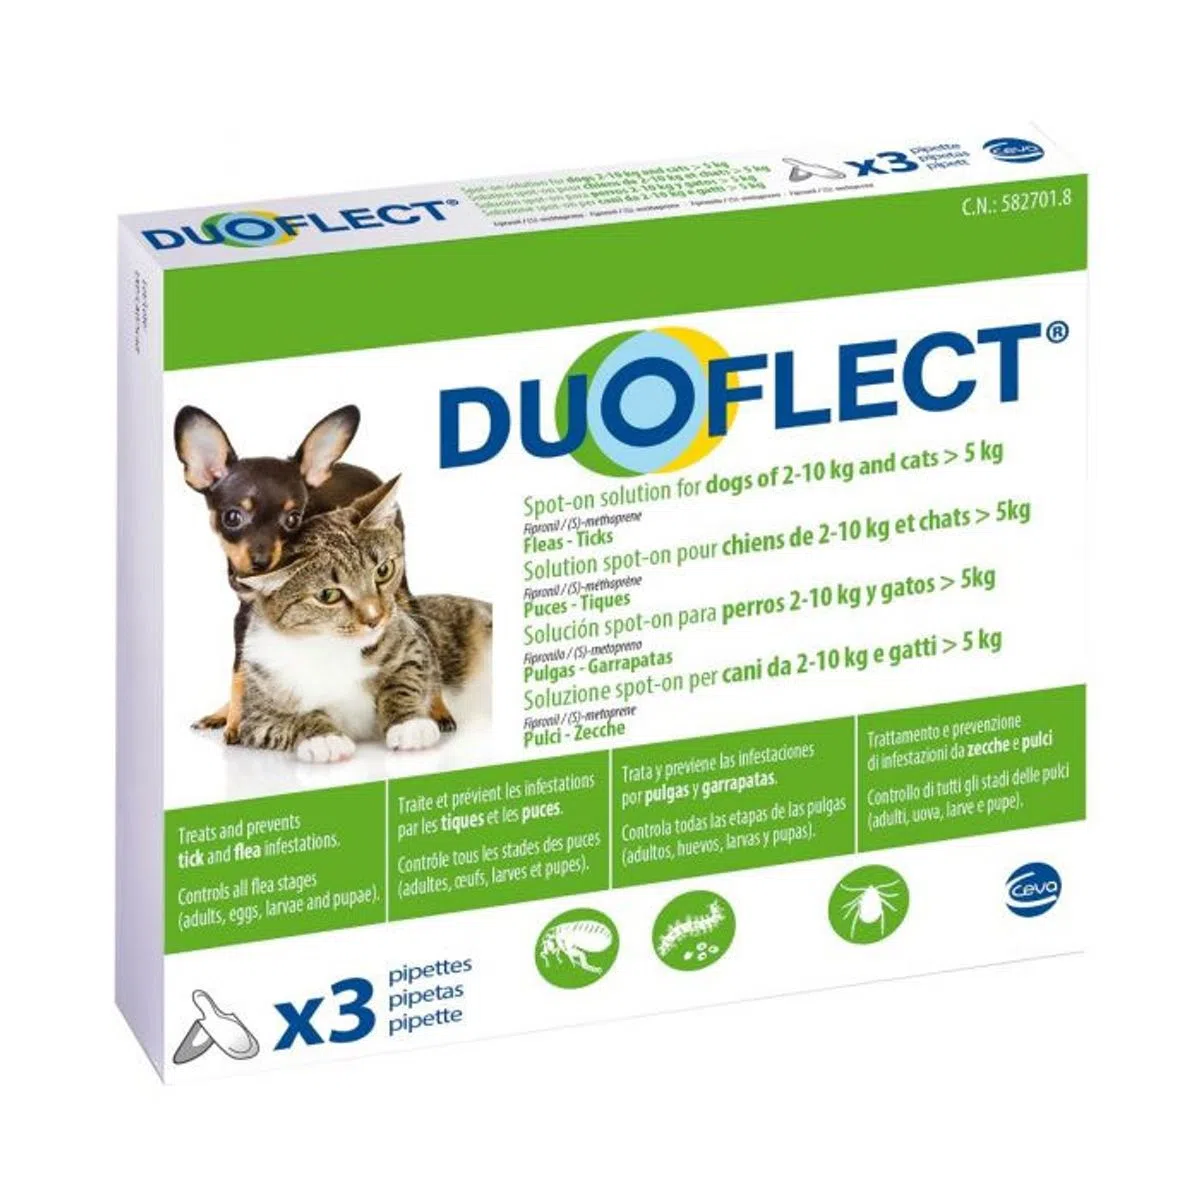 Duoflect CAT (>5KG) and DOG (S), 2-10KG [1]